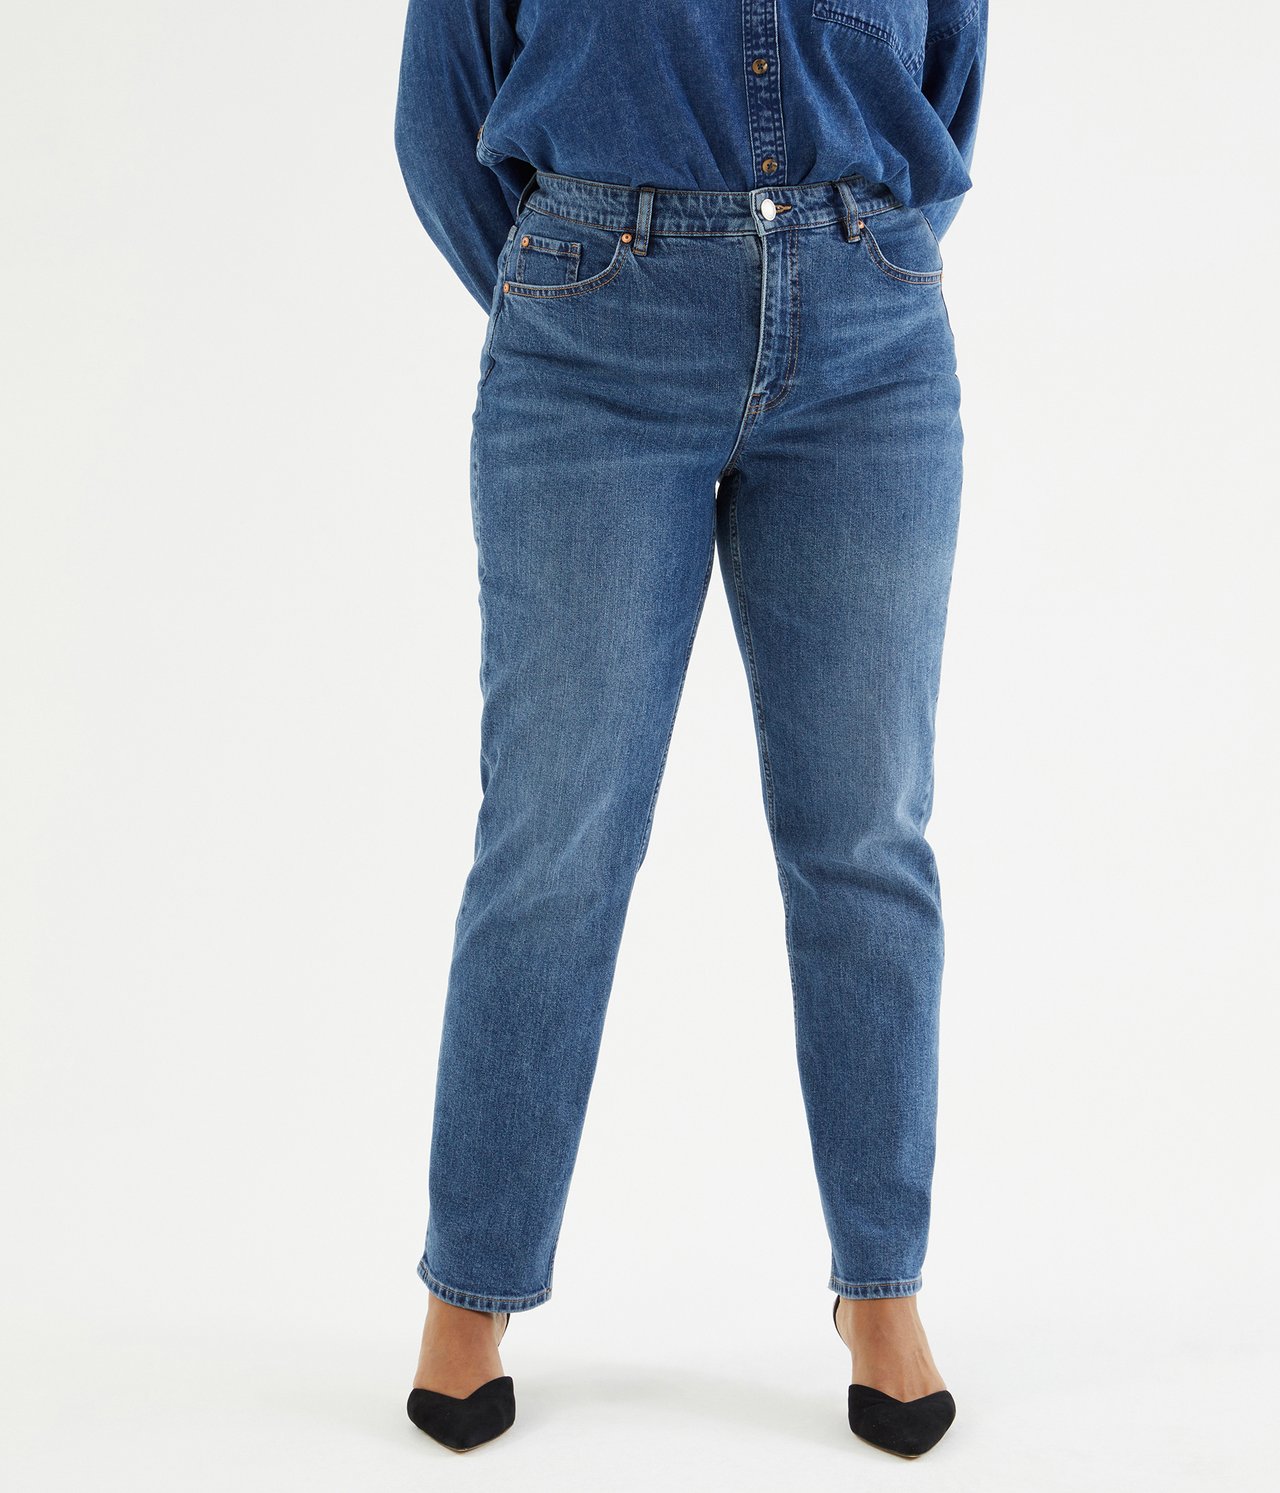 Jeans high waist tapered - Denimi - 4